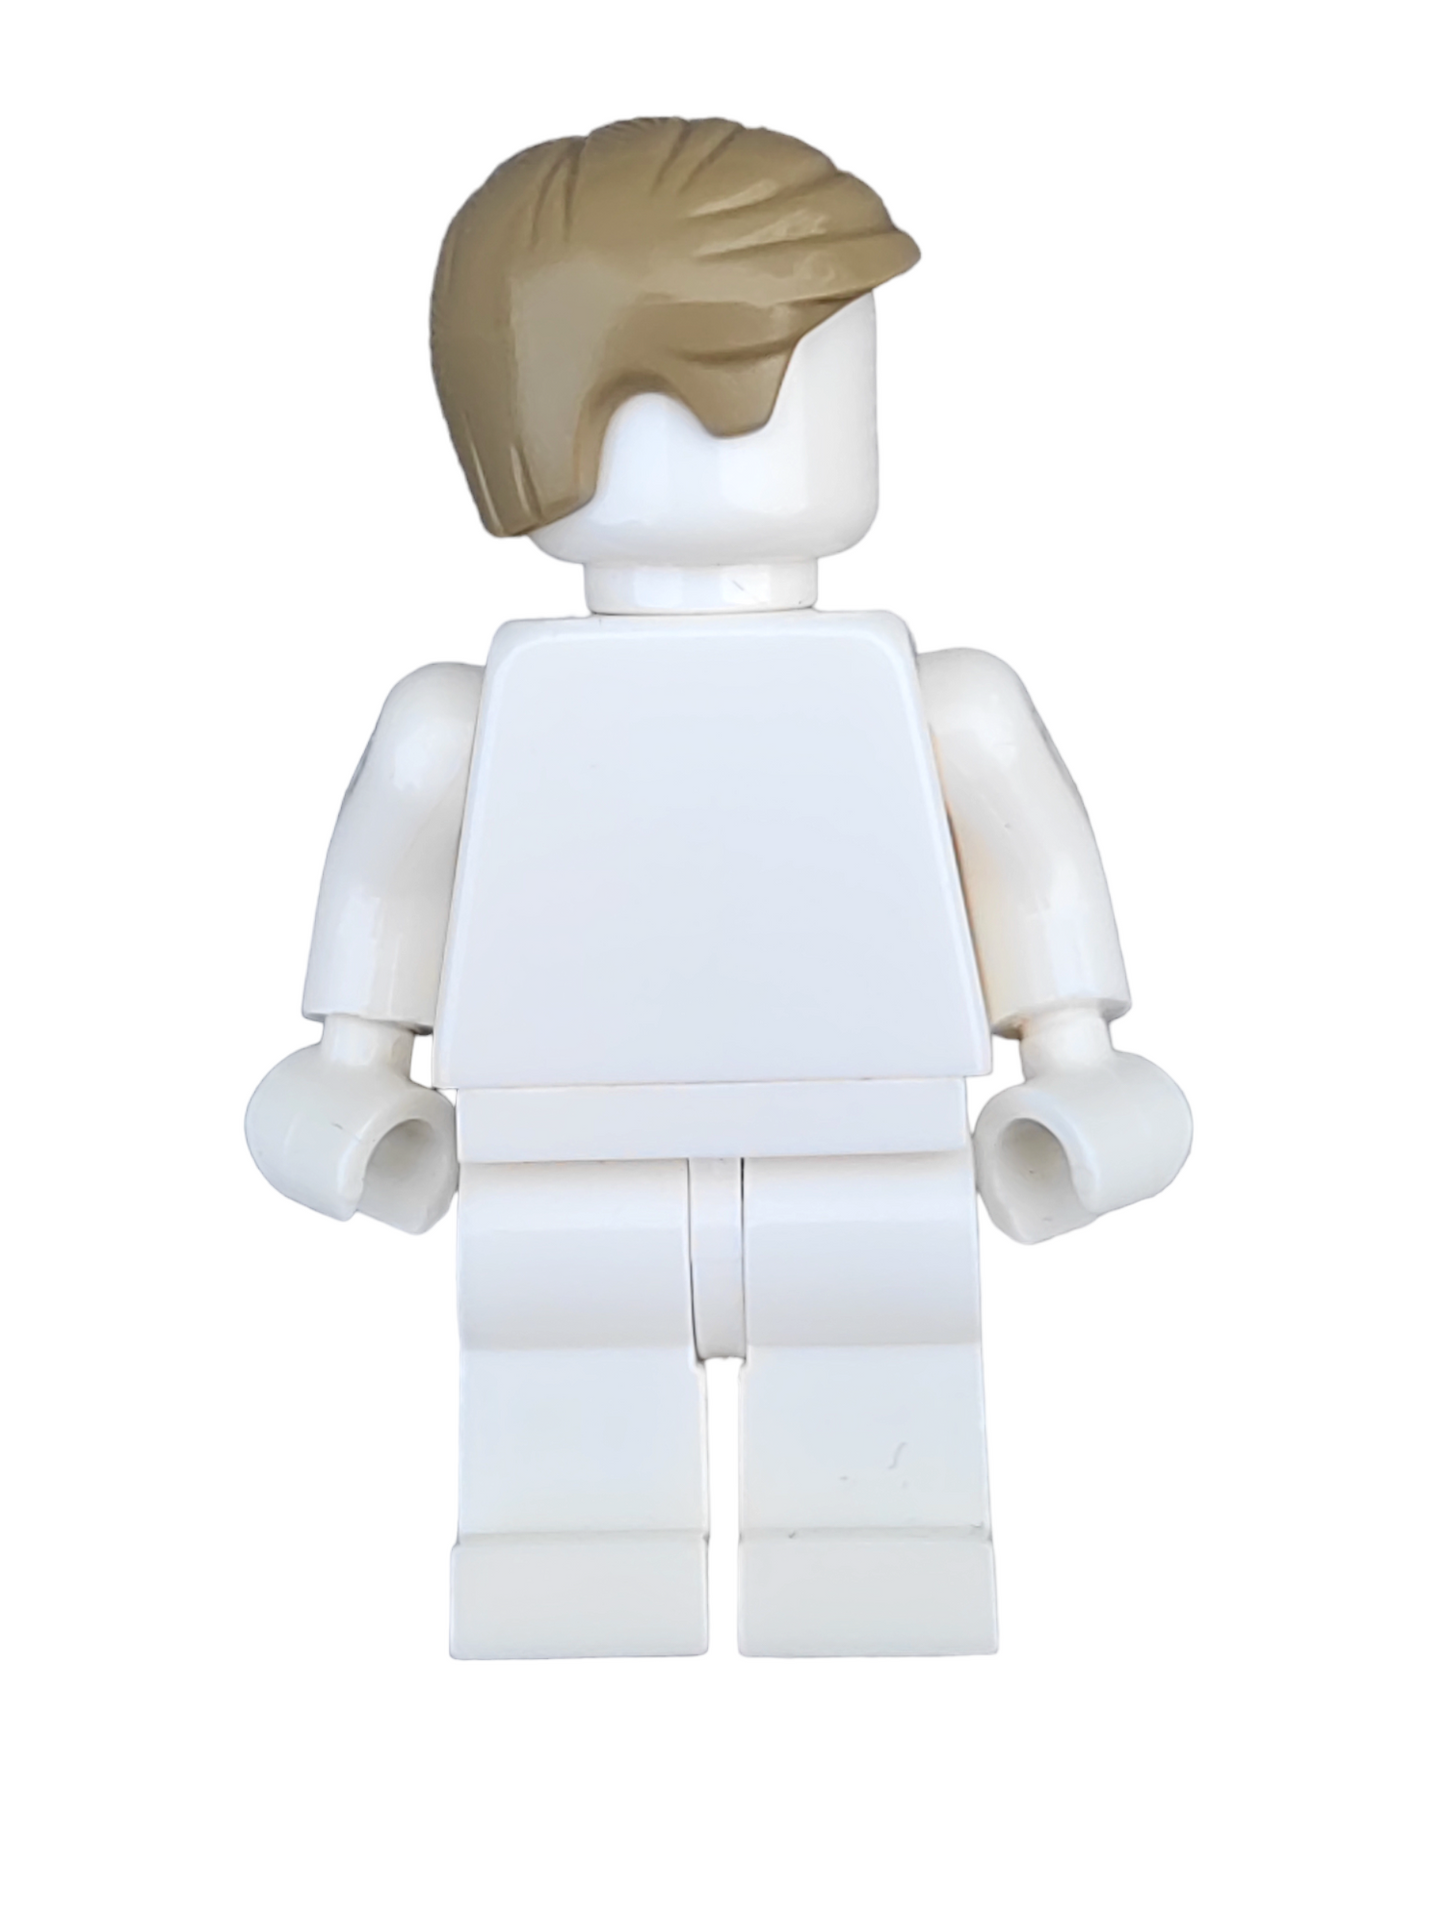 LEGO Wig, Brown Hair Short Combed to the Side - UB1246